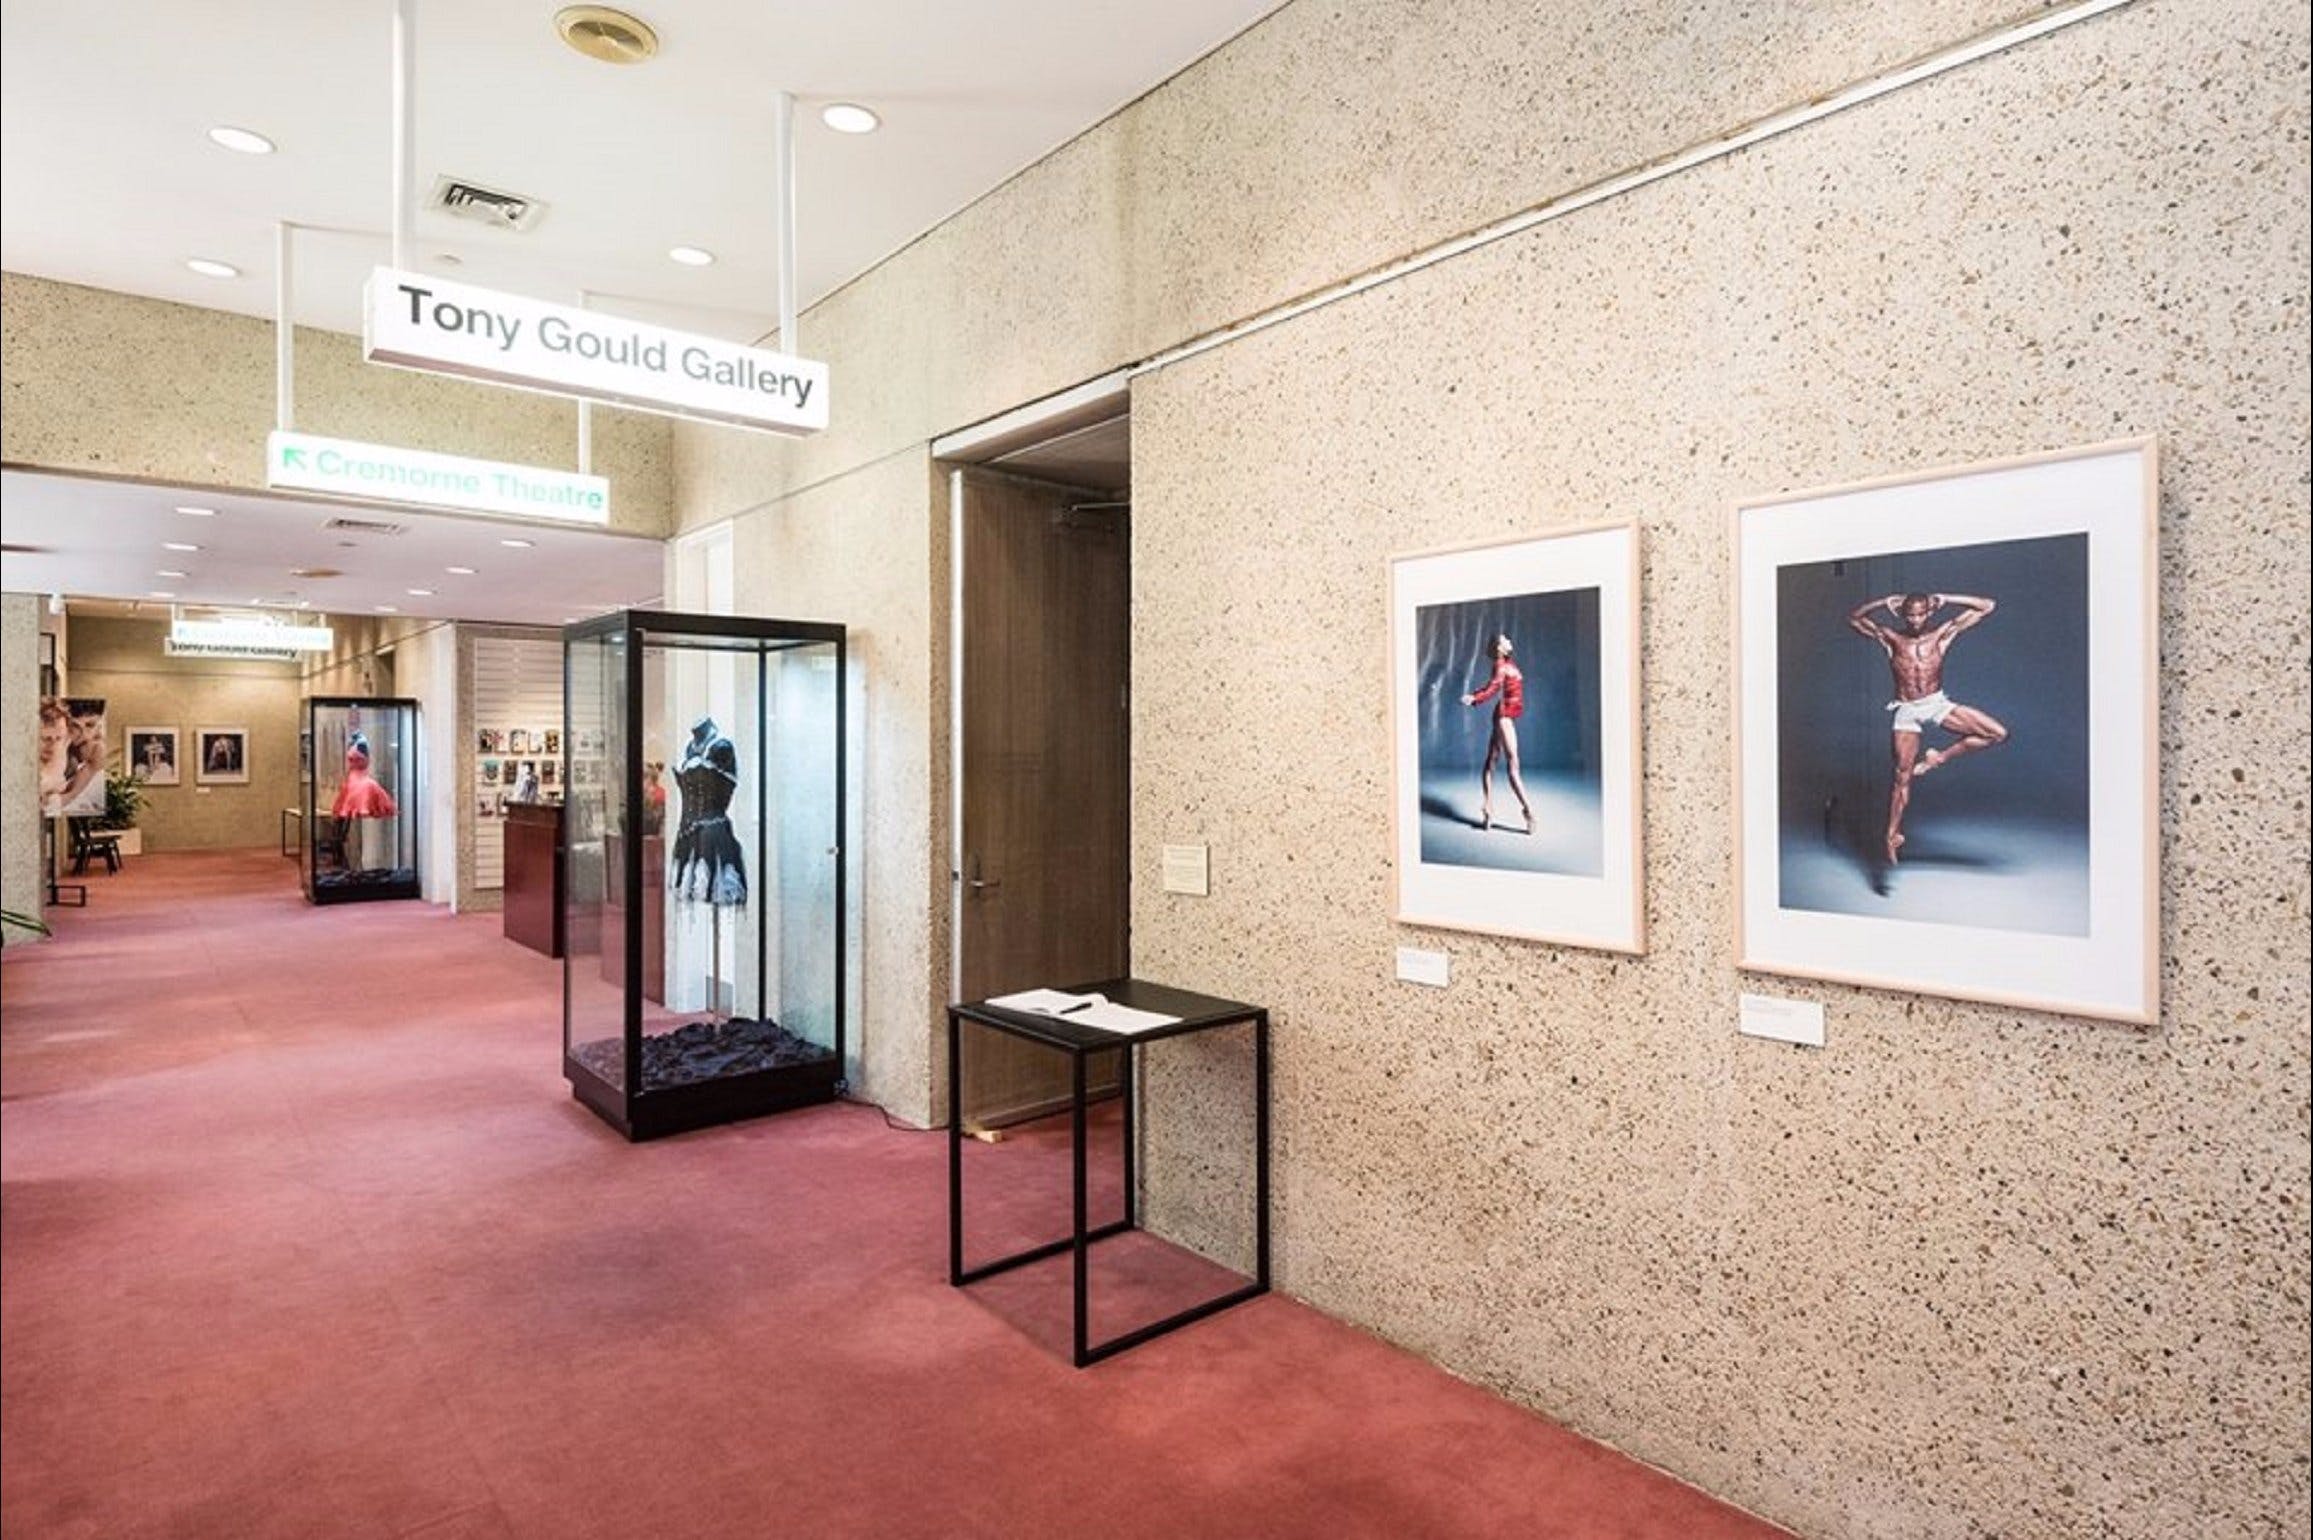 Tony Gould Gallery - Attractions Sydney